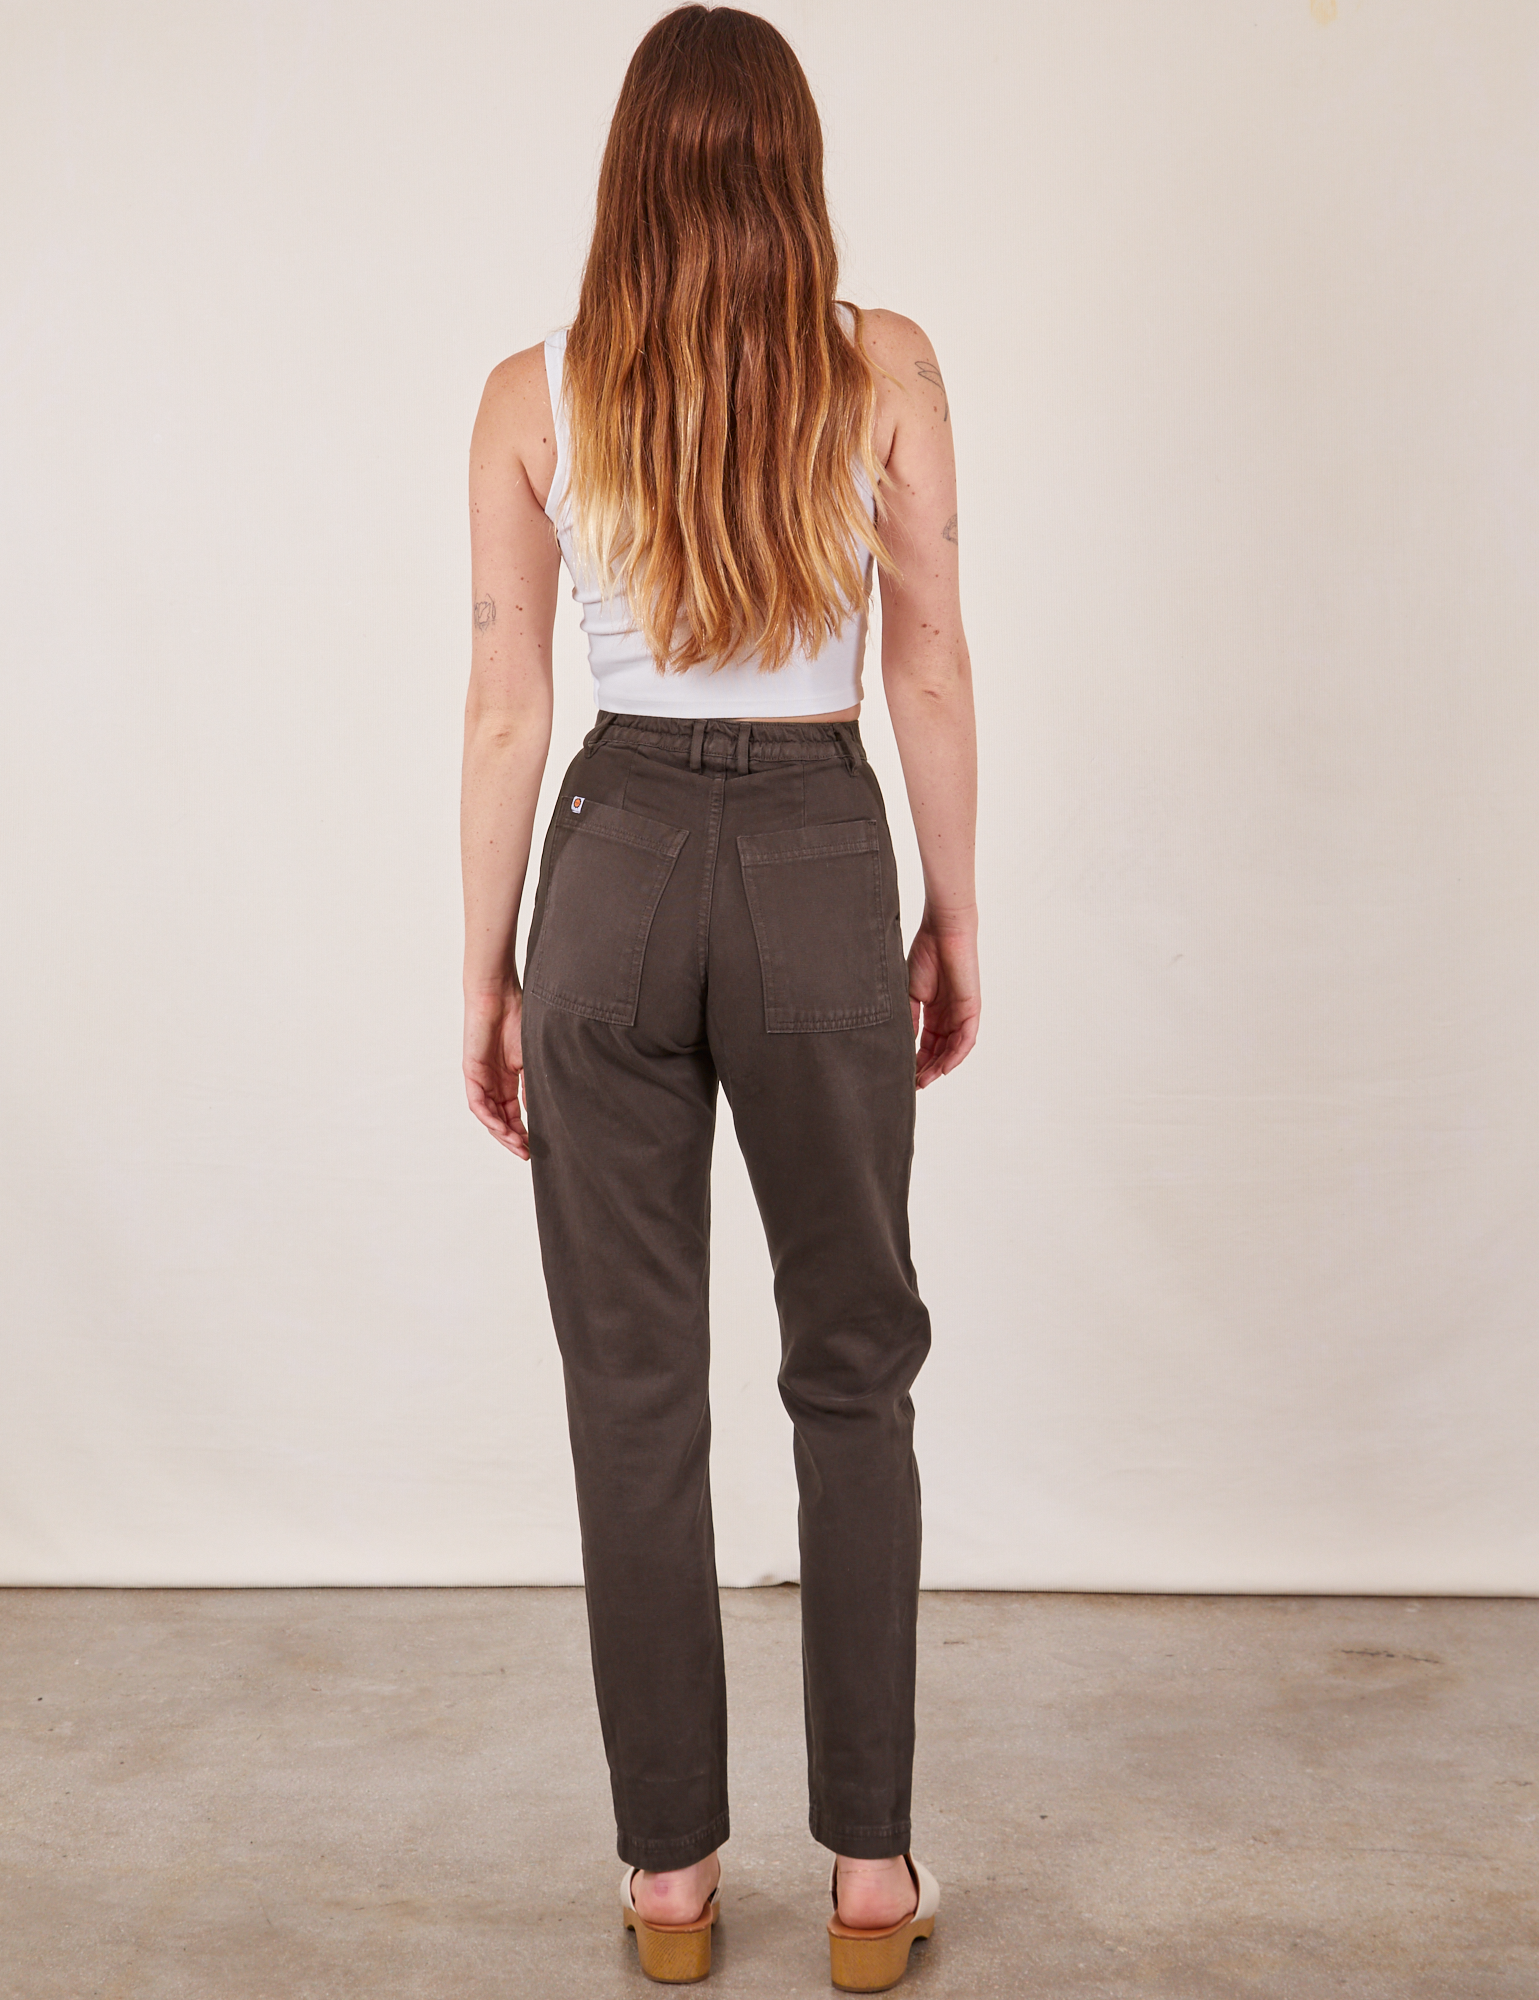 Pencil Pants in Espresso Brown back view on Scarlett